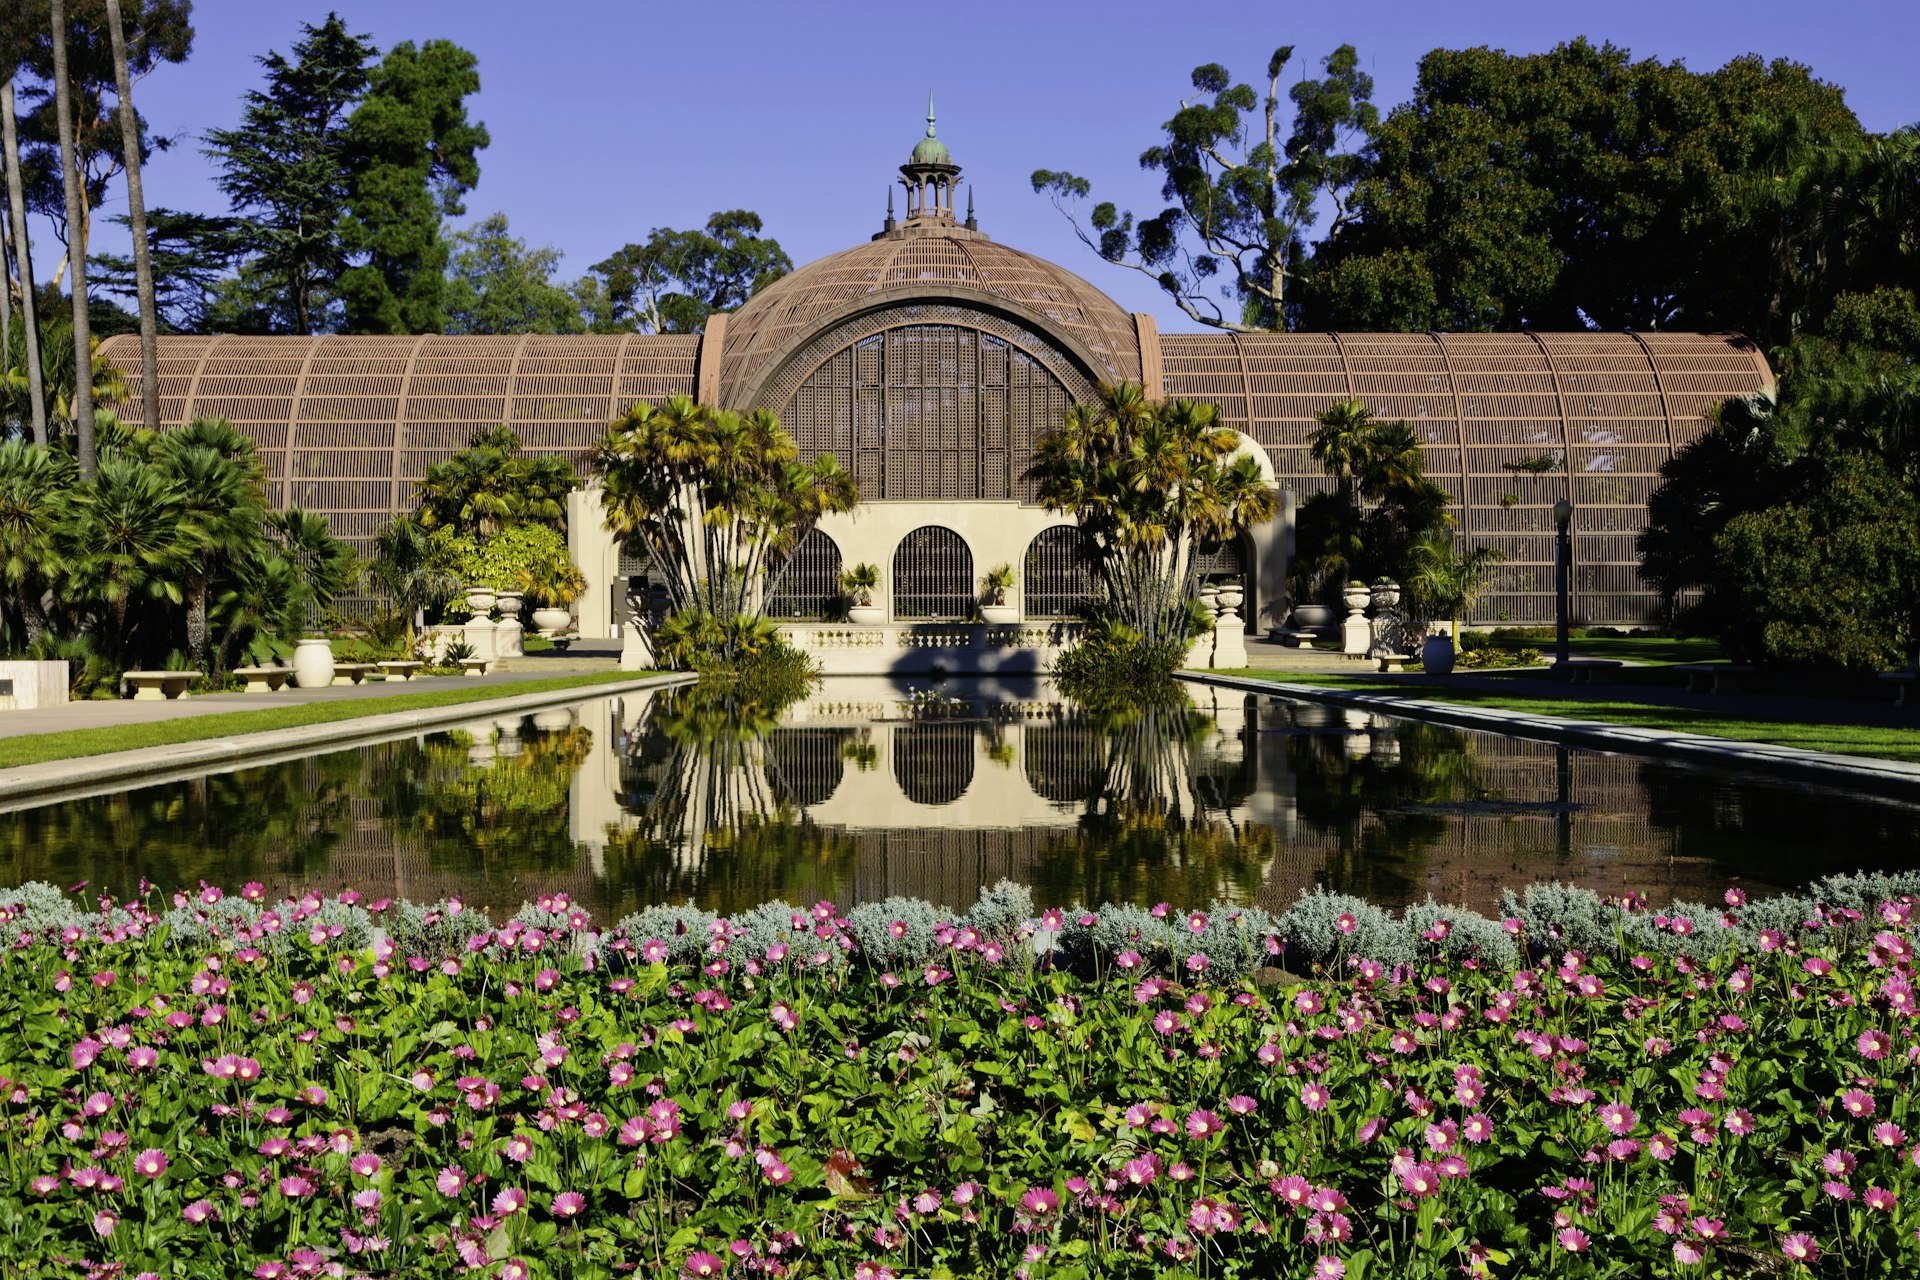 The Botanical Building in Balboa Park, San Diego reflects into a lake surrounded by flowers